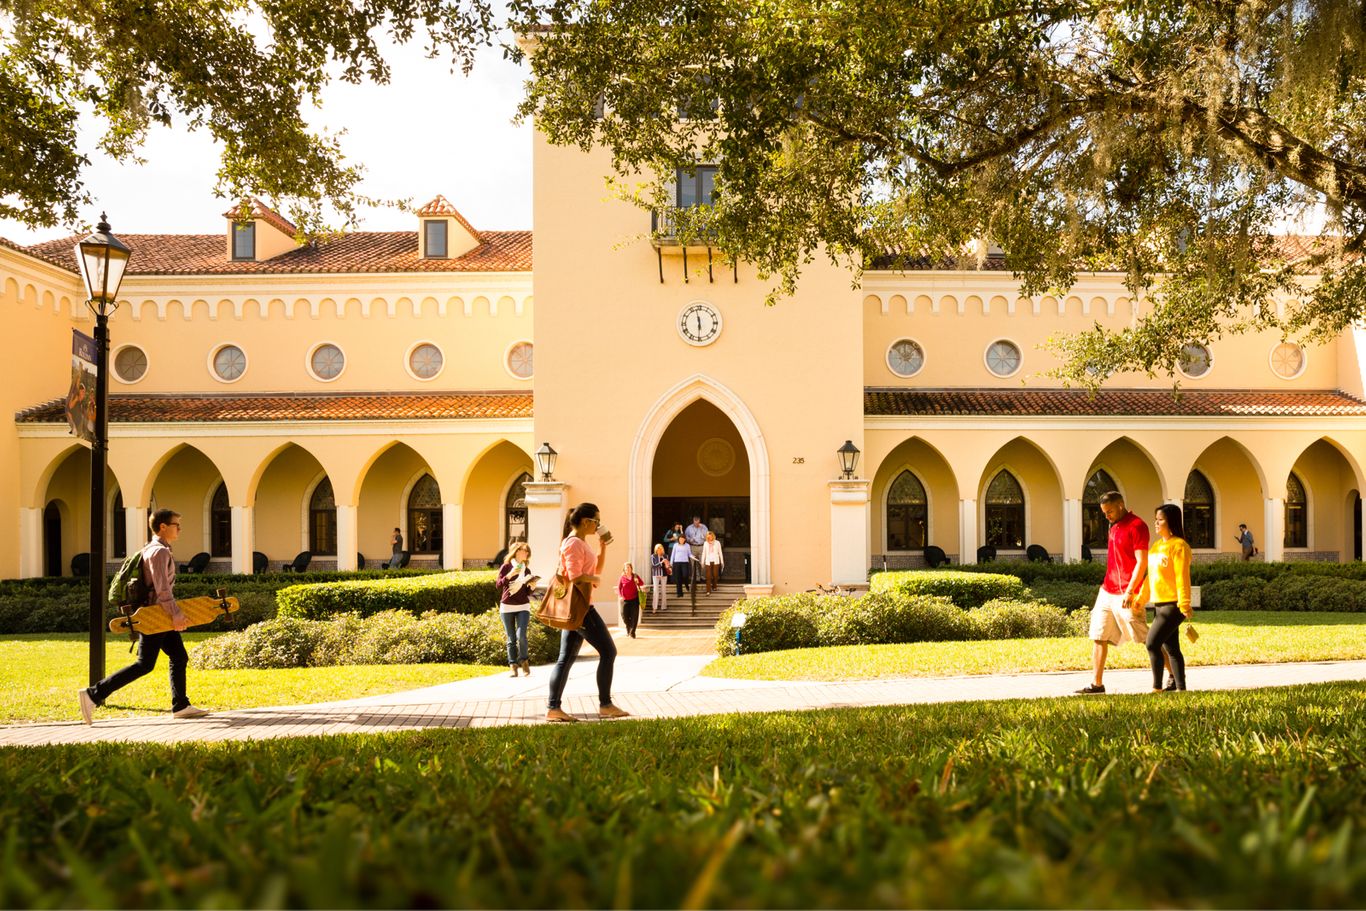 19 Reasons Rollins is America’s Most Beautiful Campus